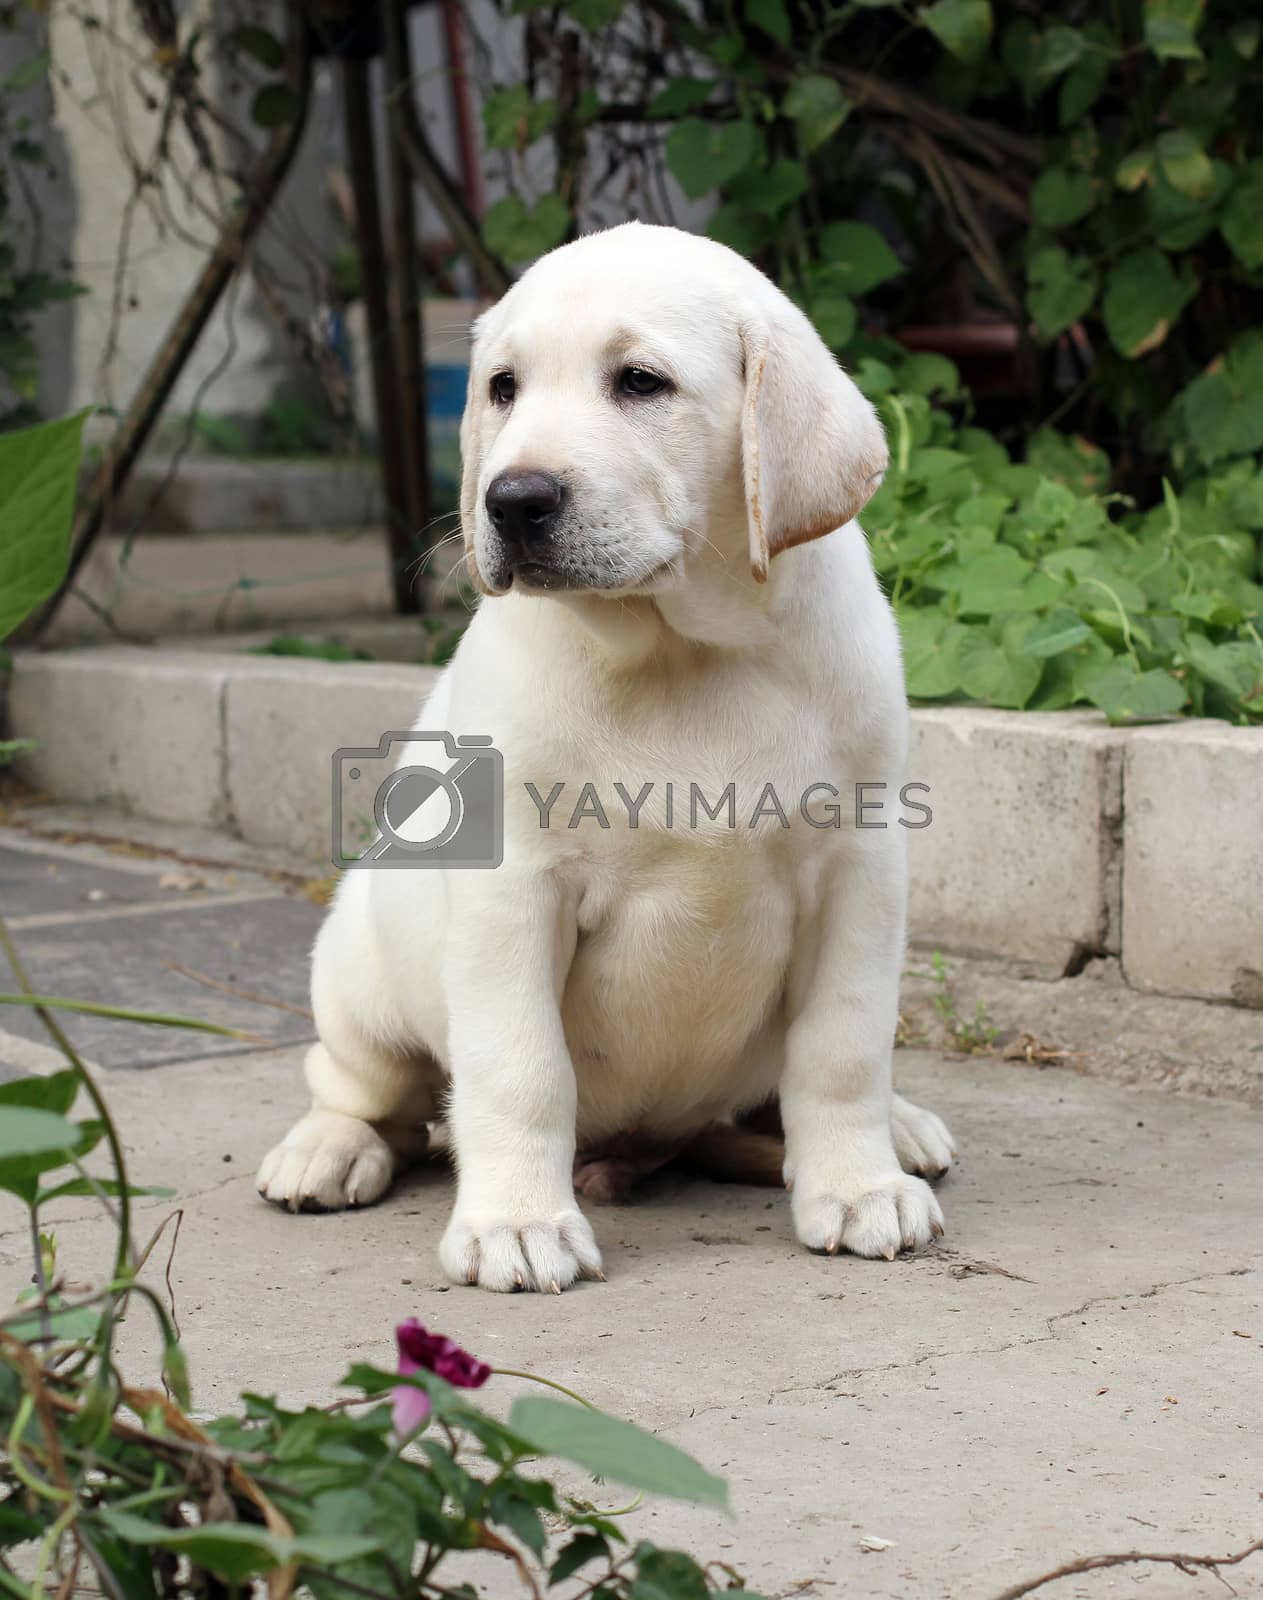 Royalty free image of sweet yellow labrador in the park by Yarvet